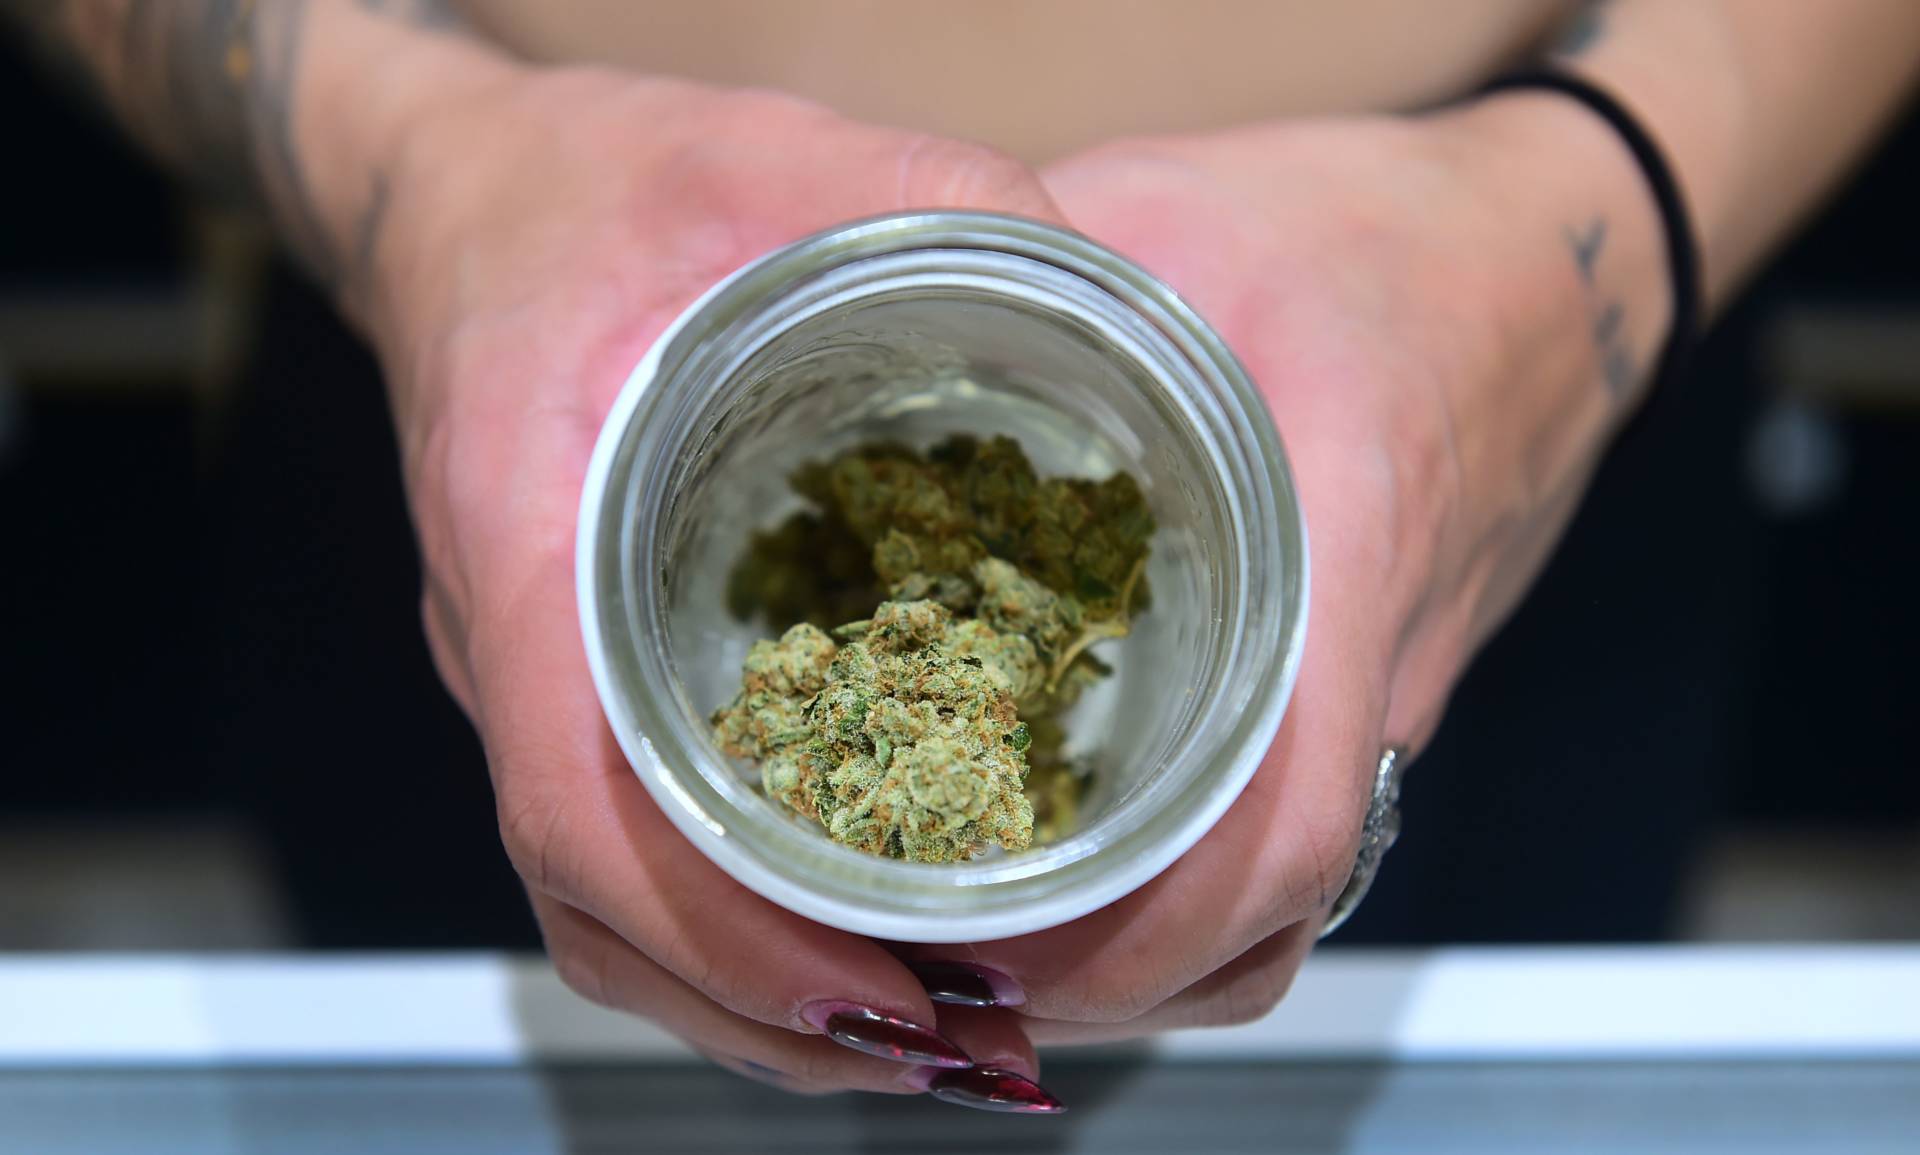 A jar of Insane OG, a strain of marijuana, is displayed at the opening of 'Dr. Greenthumb', the flagship medical and recreational marijuana dispensary opened today by B Real of Cypress Hill fame in Sylmar, California on August 15, 2018. FREDERIC J. BROWN/AFP/Getty Images